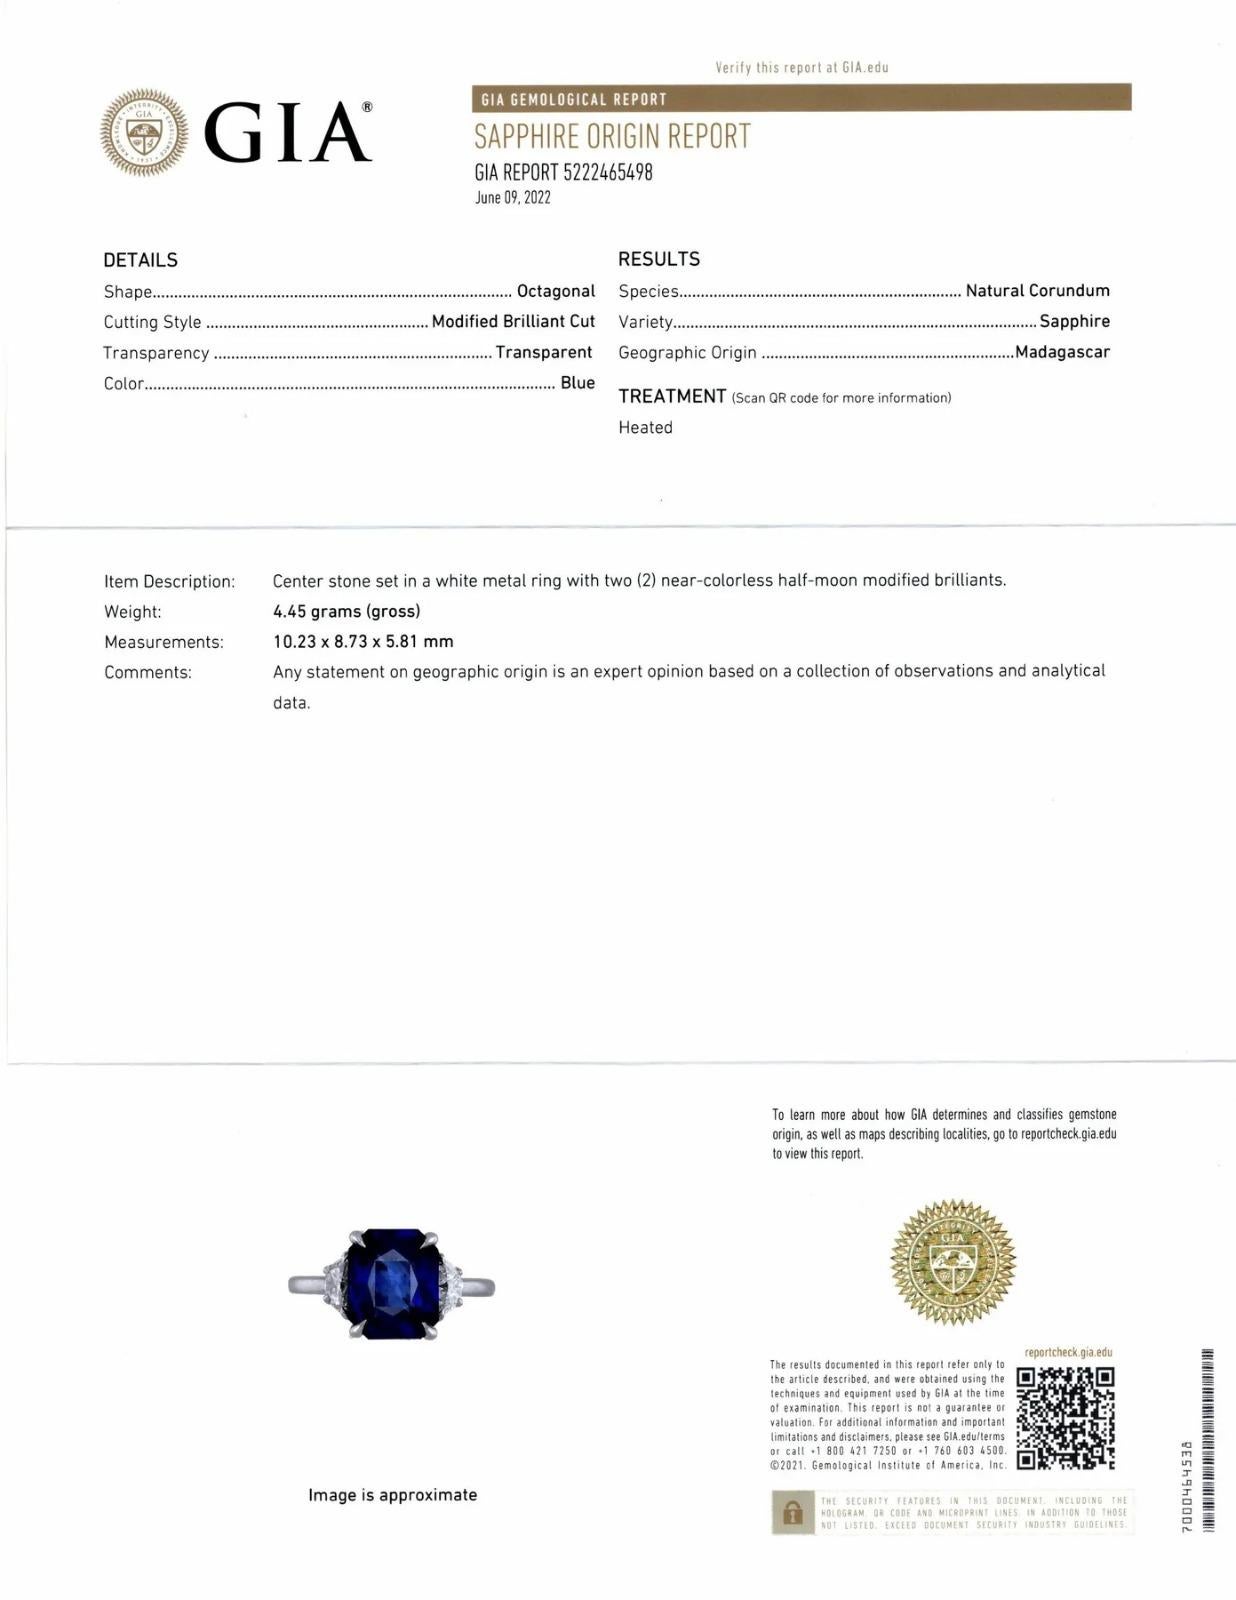 GIA certified sapphire and diamond ring features a gorgeous sapphire center stone accented by half moon diamond accents. The color of the substantial 5.30ct radiant sapphire is a vibrant and rich royal blue hue! It is paired with an elegant sleek